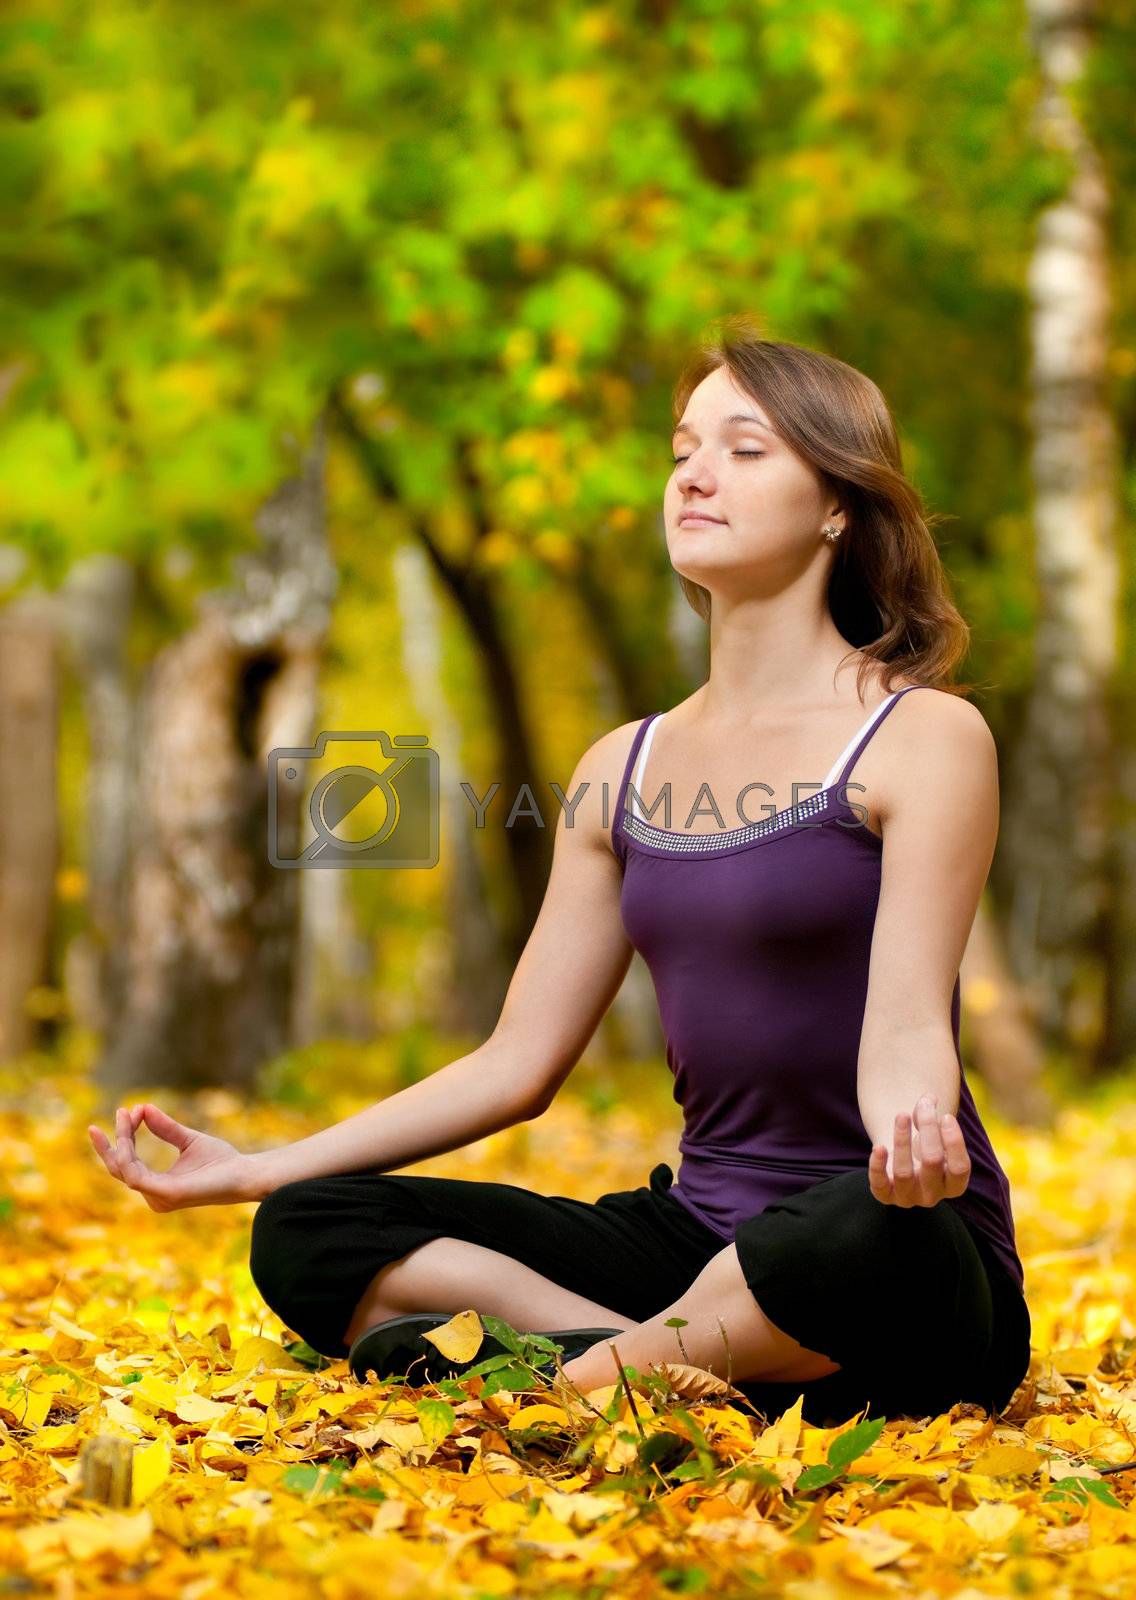 Royalty free image of Woman doing yoga exercises in the autumn park by markin